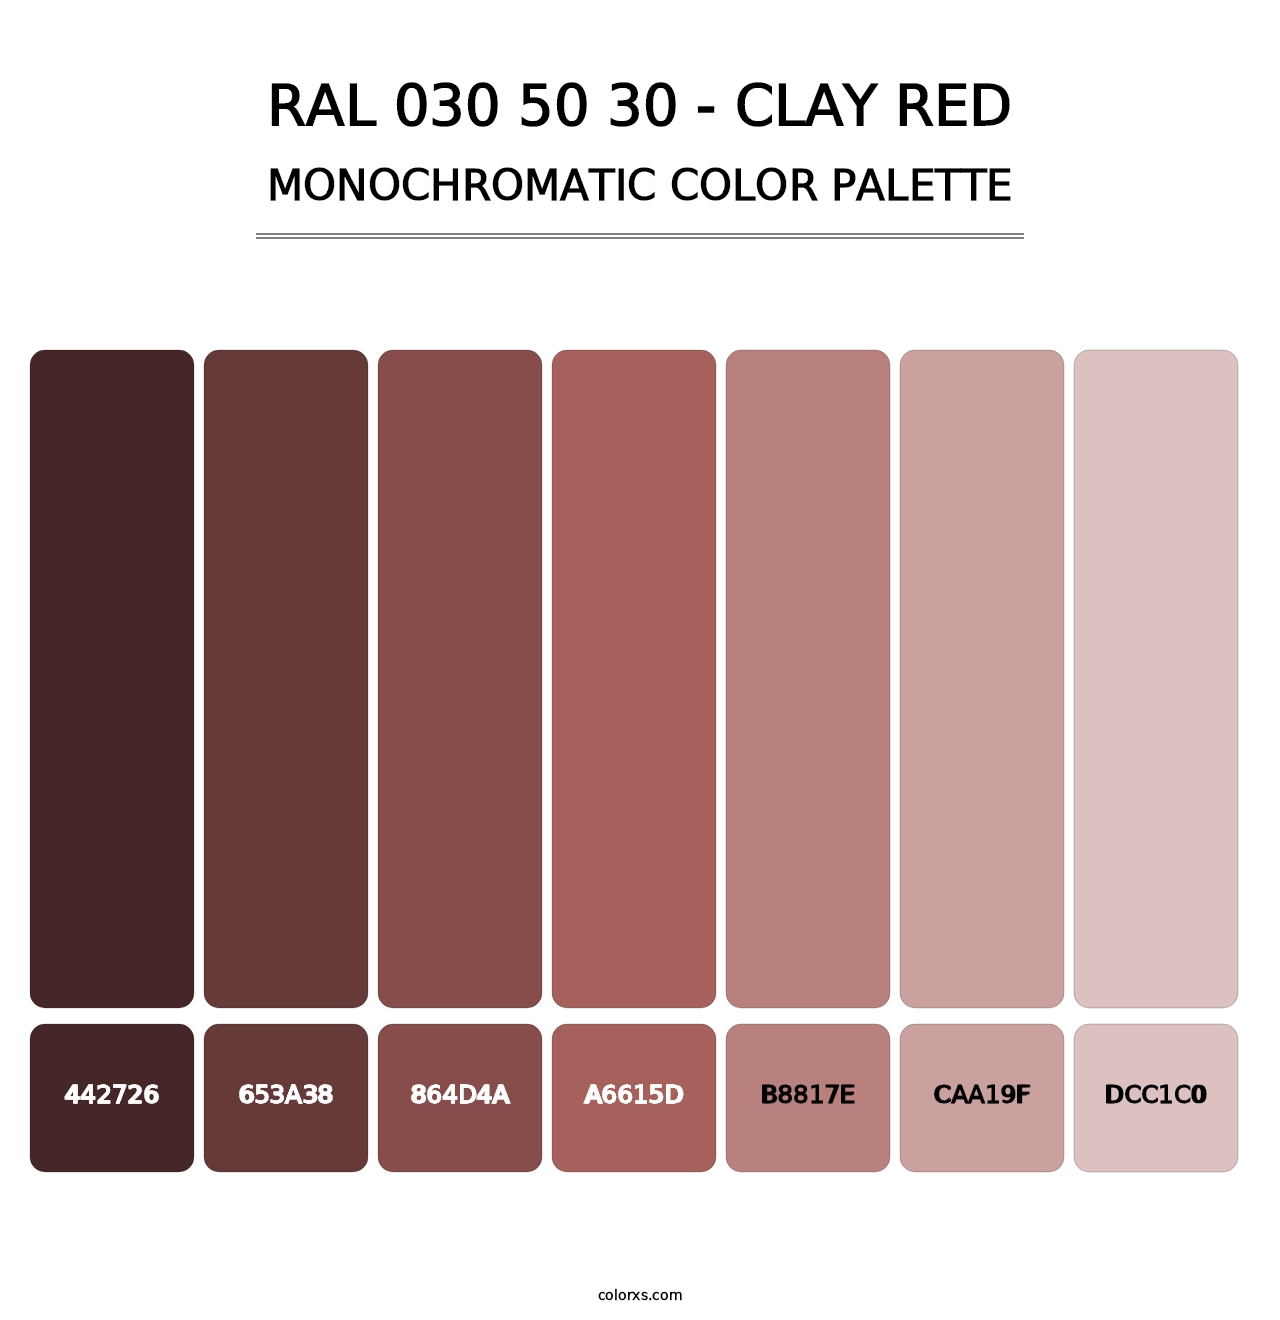 RAL 030 50 30 - Clay Red - Monochromatic Color Palette